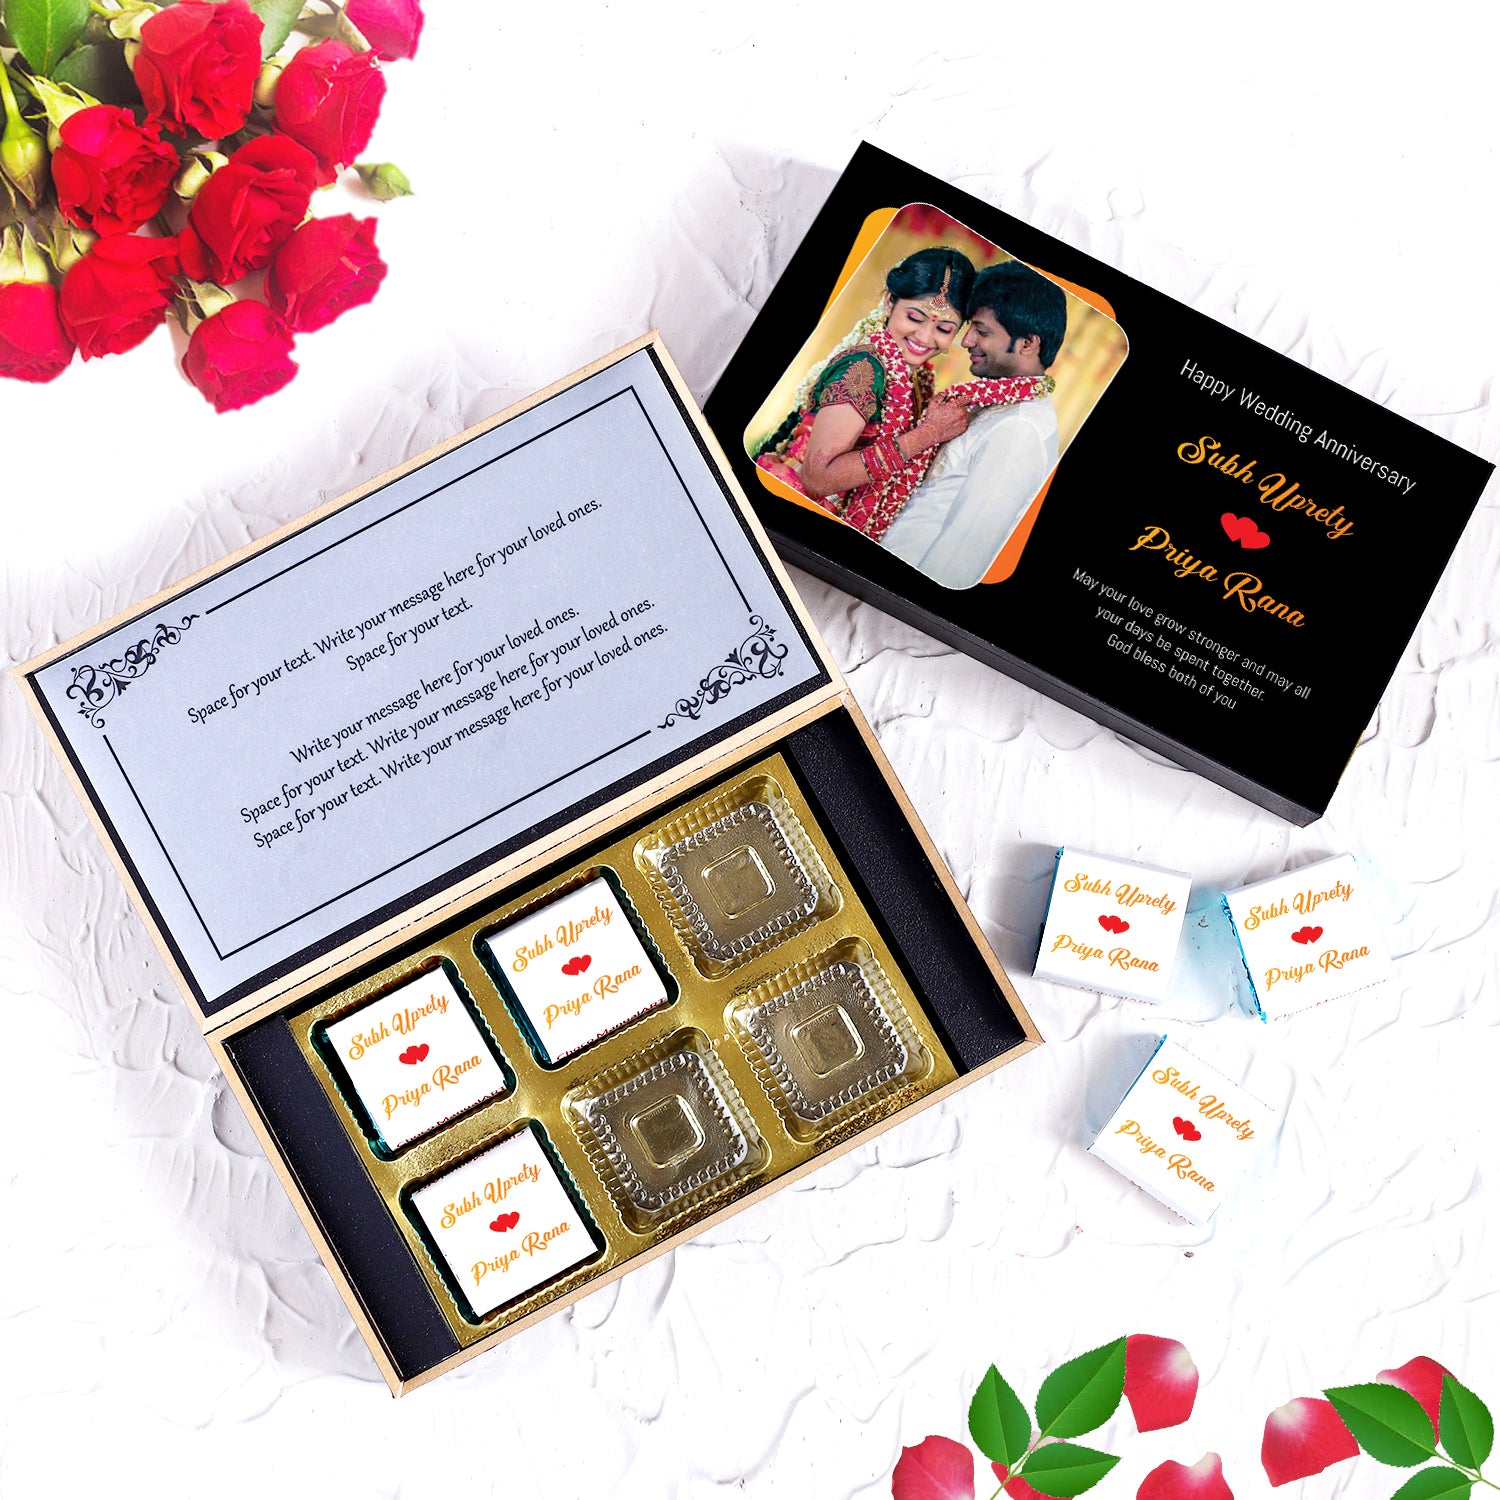 Names with Photo design Printed on Chocolate Wrappers.There is also a personalized message printed on Message paper inside the box.